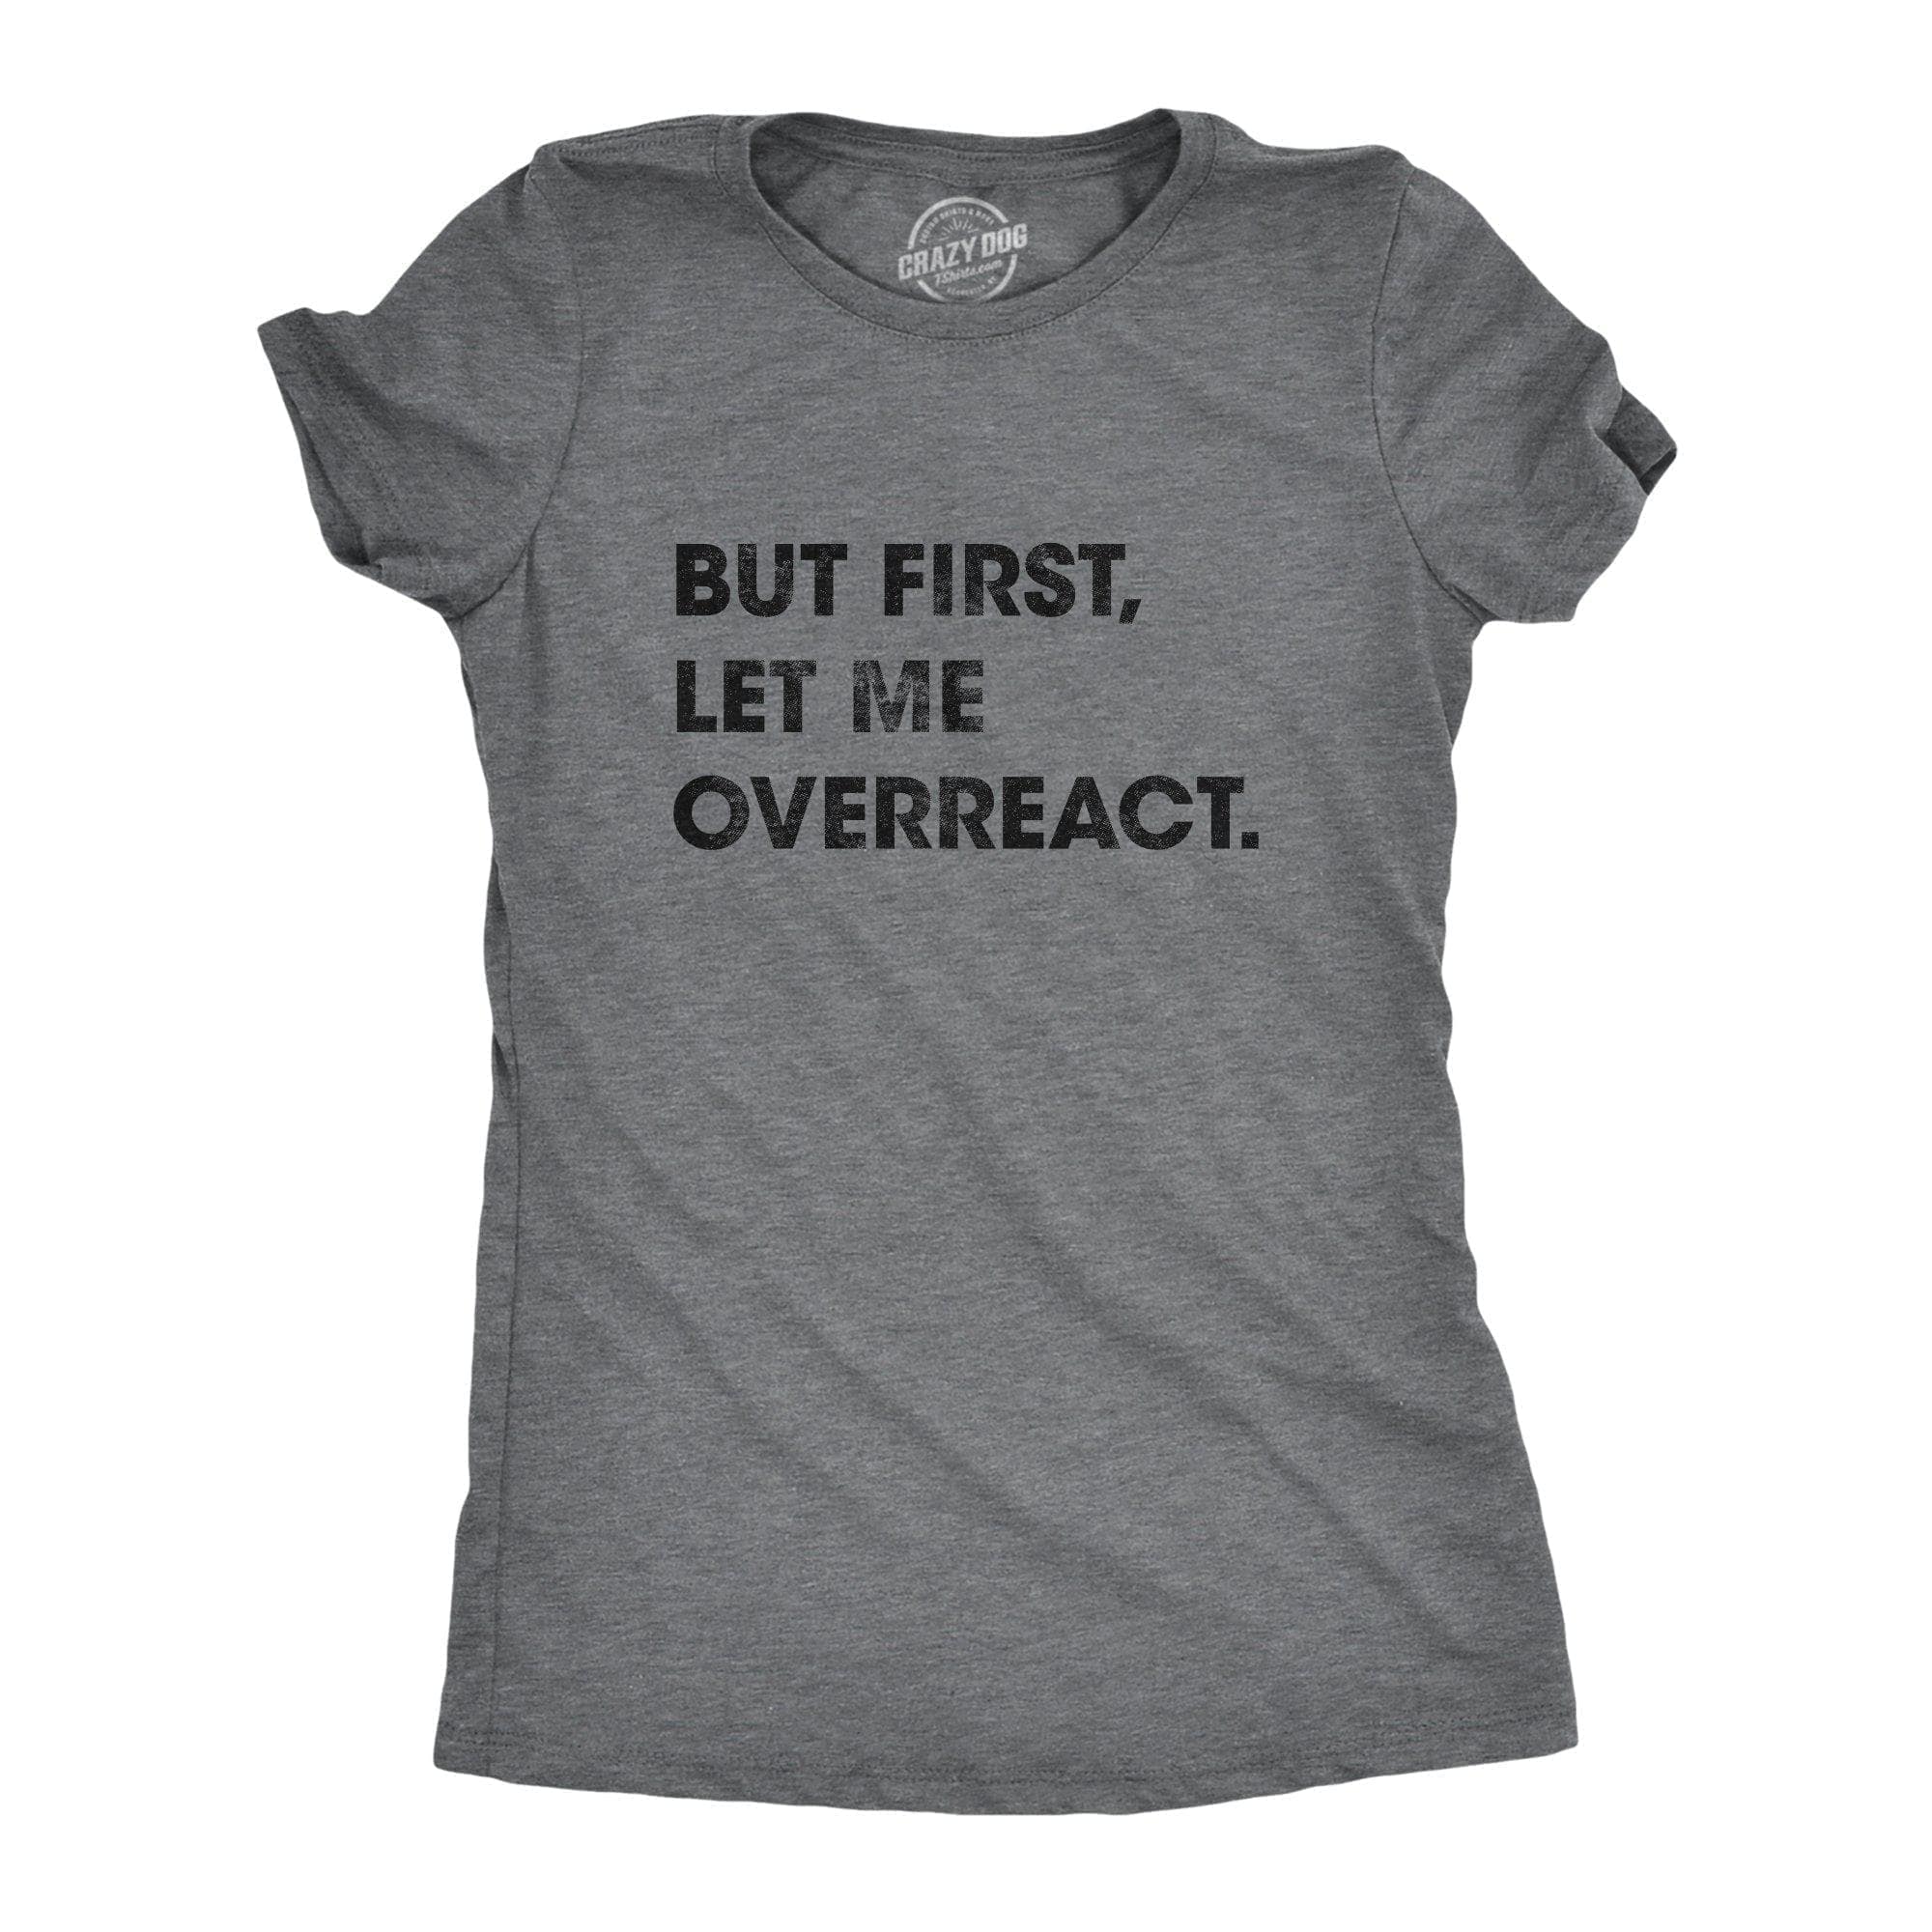 But First Let Me Overreact Women's Tshirt - Crazy Dog T-Shirts